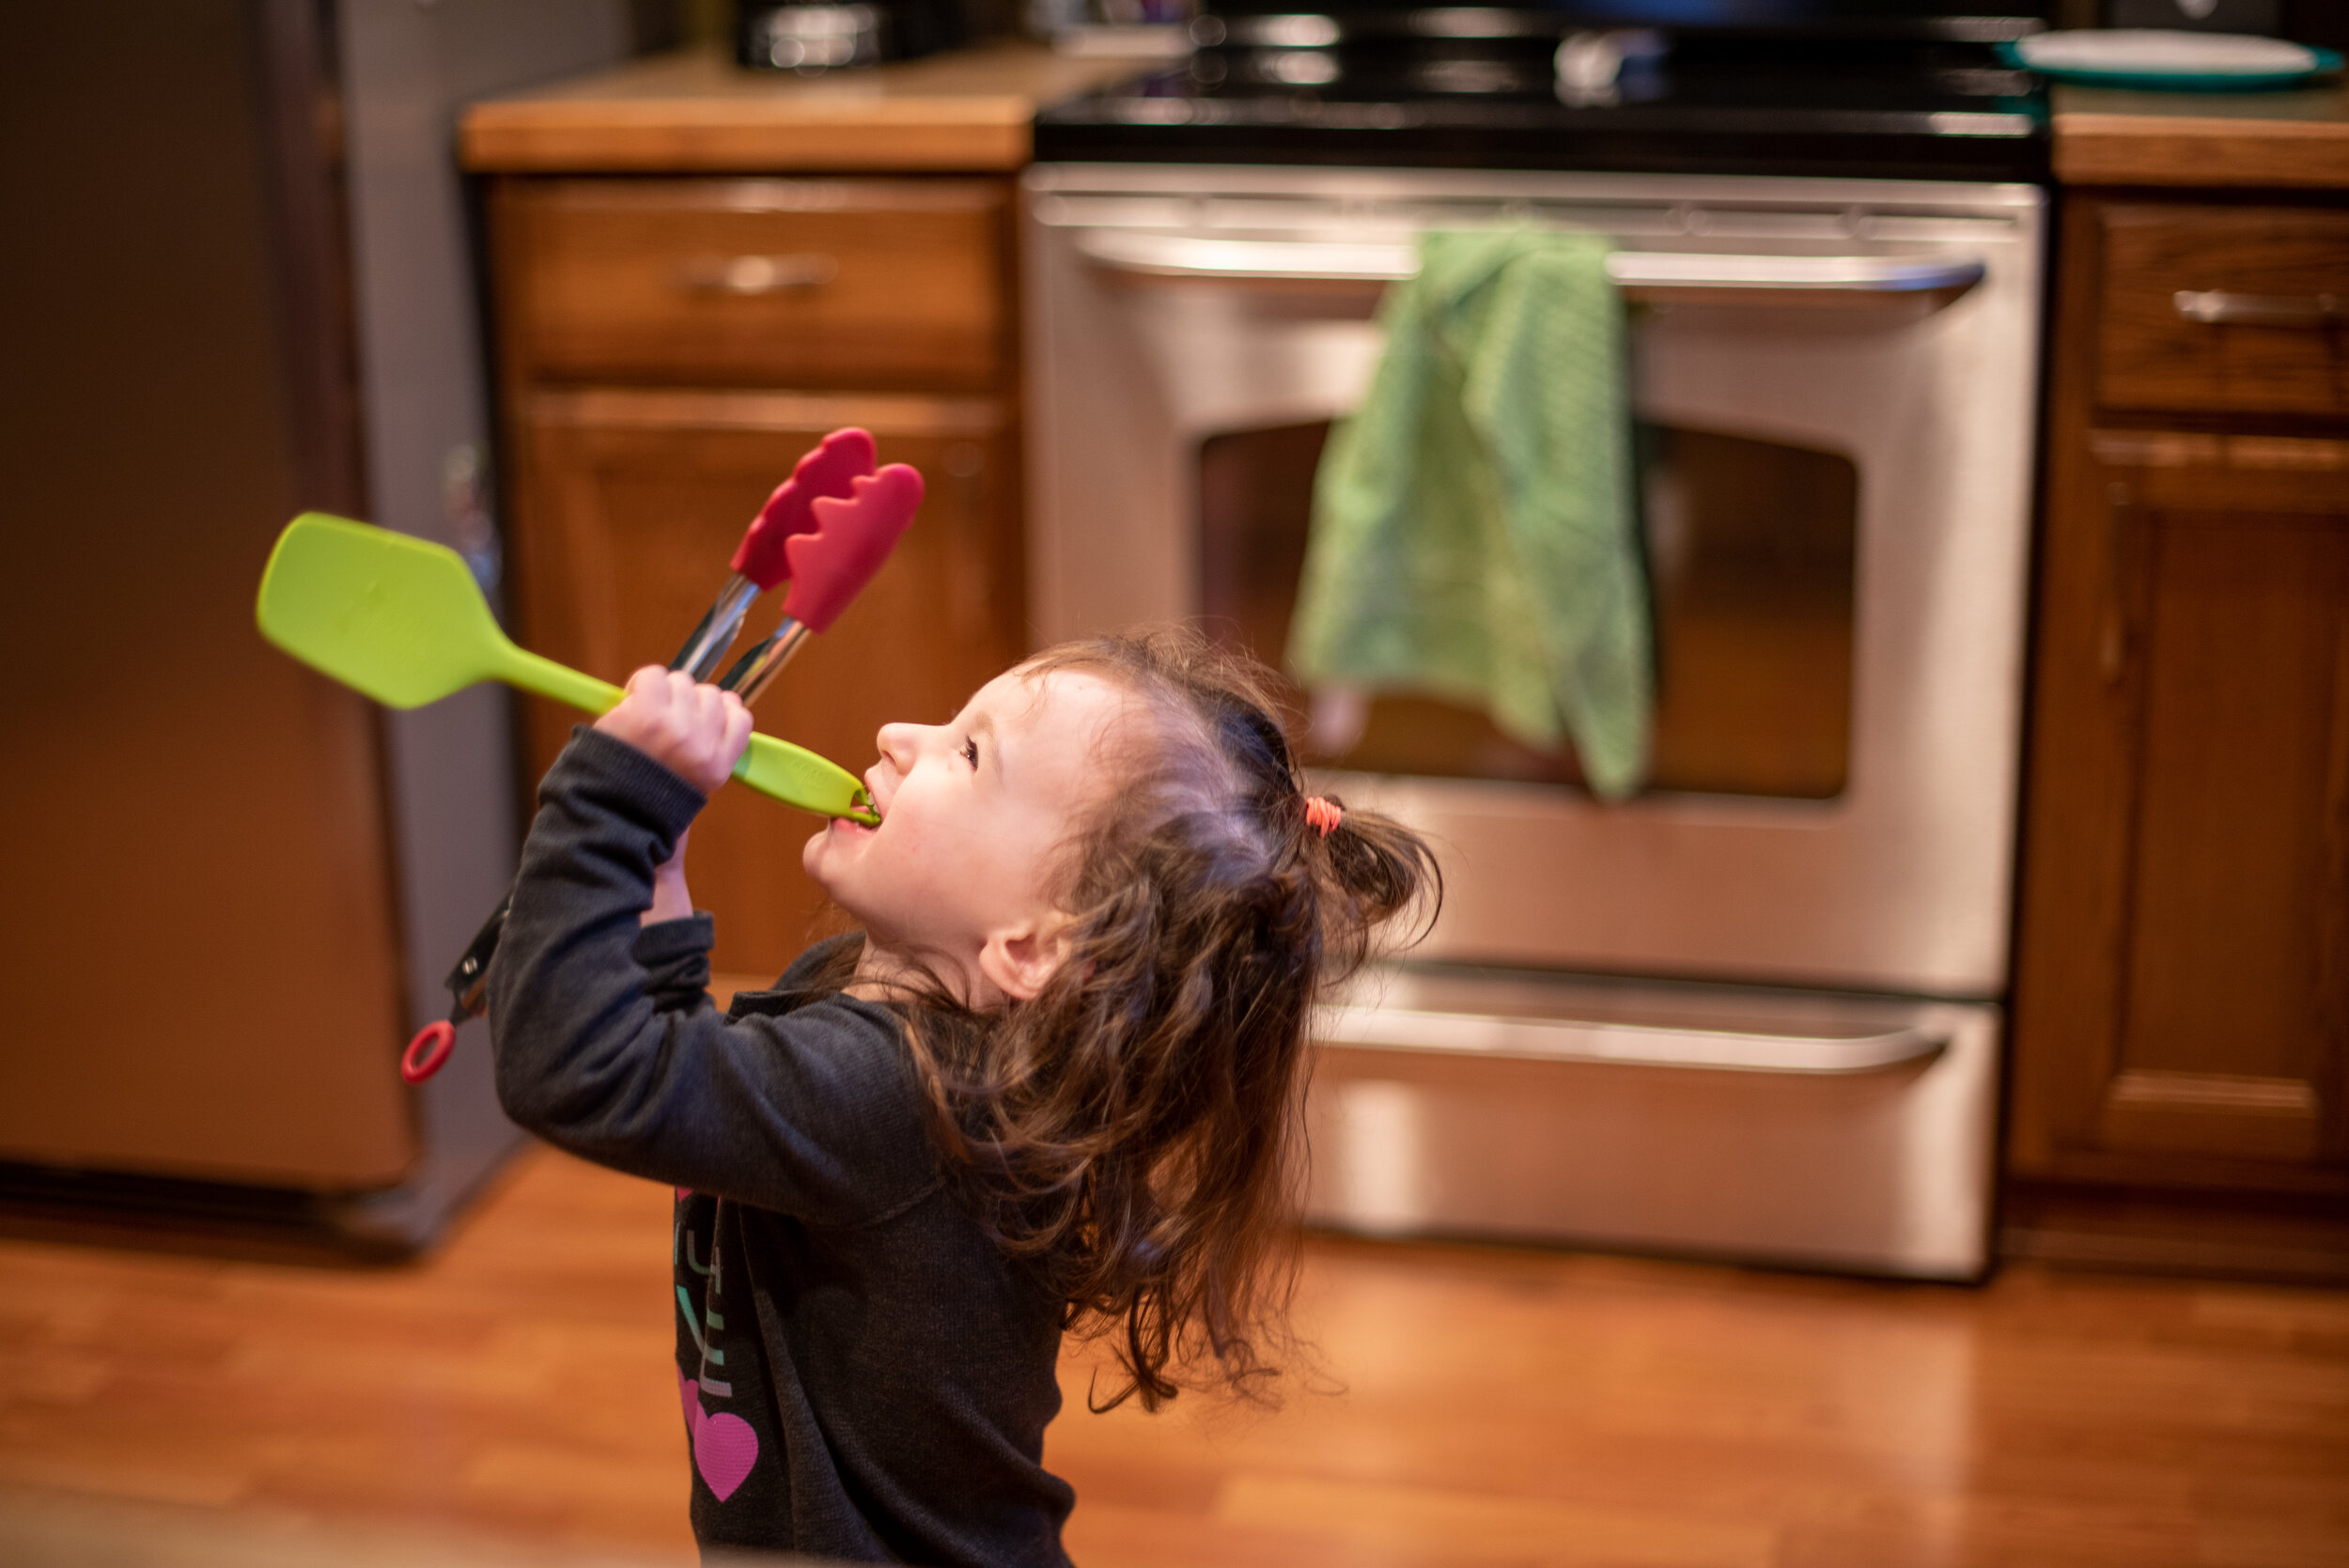 little girl in a kitchen holding red tongs and singing into a green spatula 